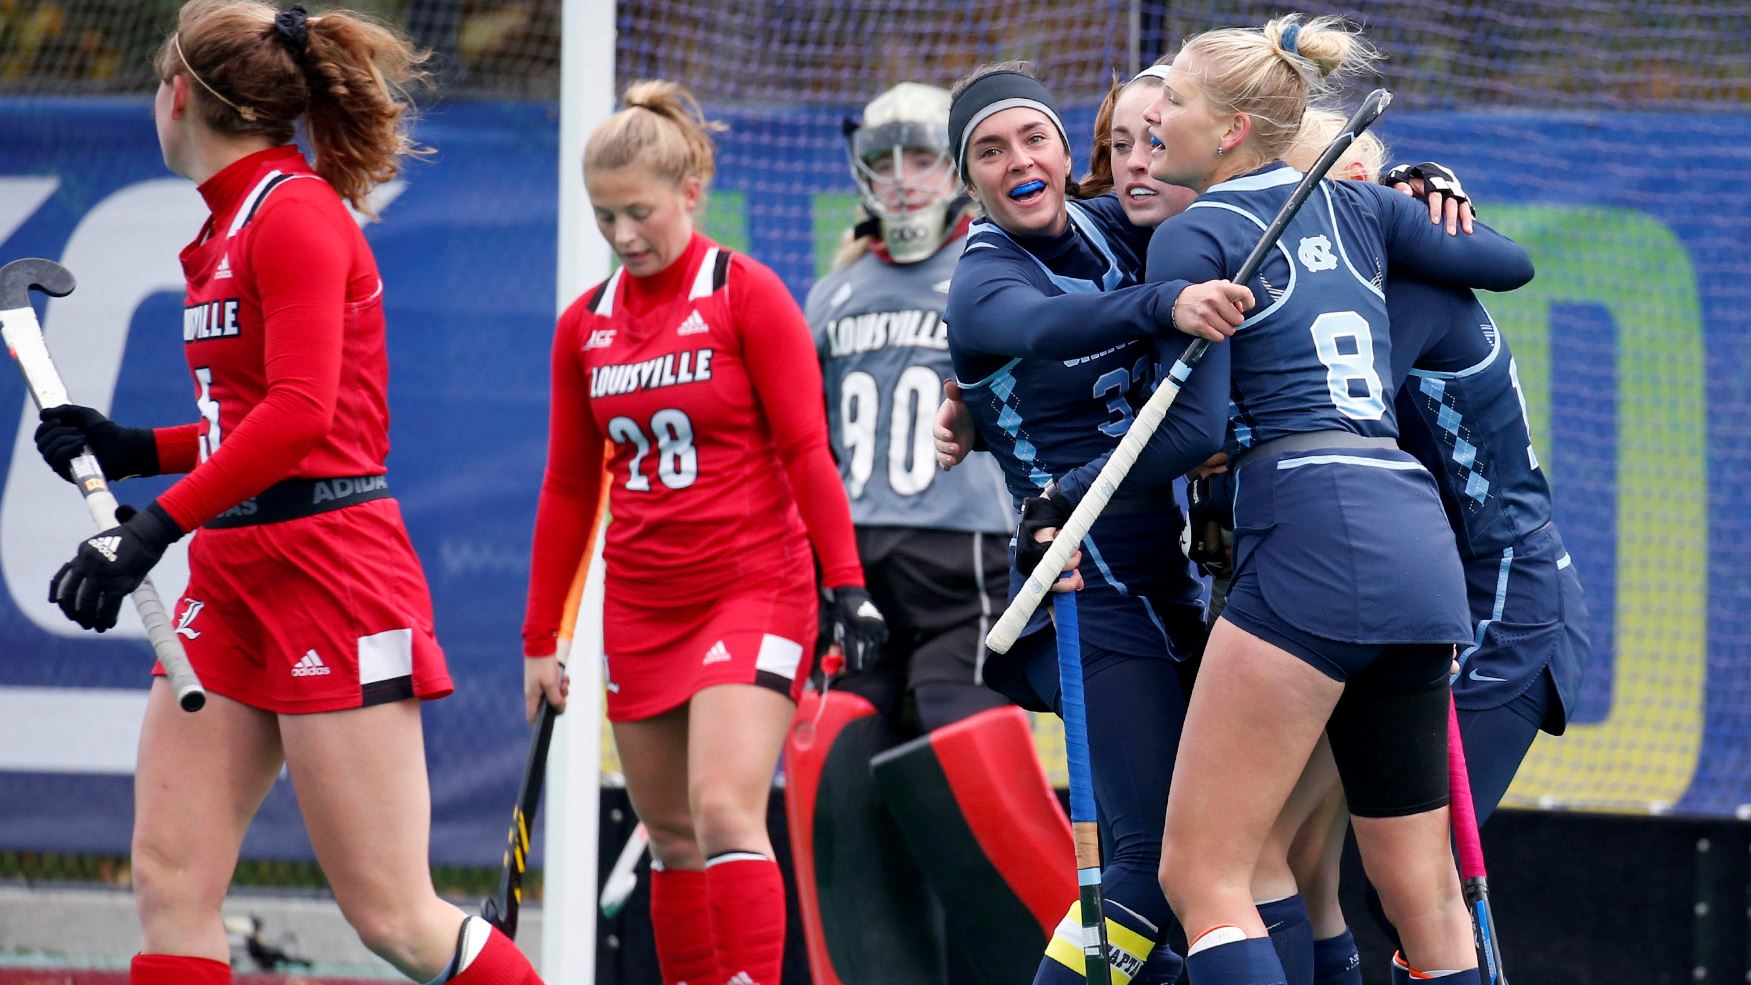 Erin Matson Returns, Leads No. 1 UNC Field Hockey to Victory Over No. 6 Louisville in ACC Tournament Semifinals - Chapelboro.com